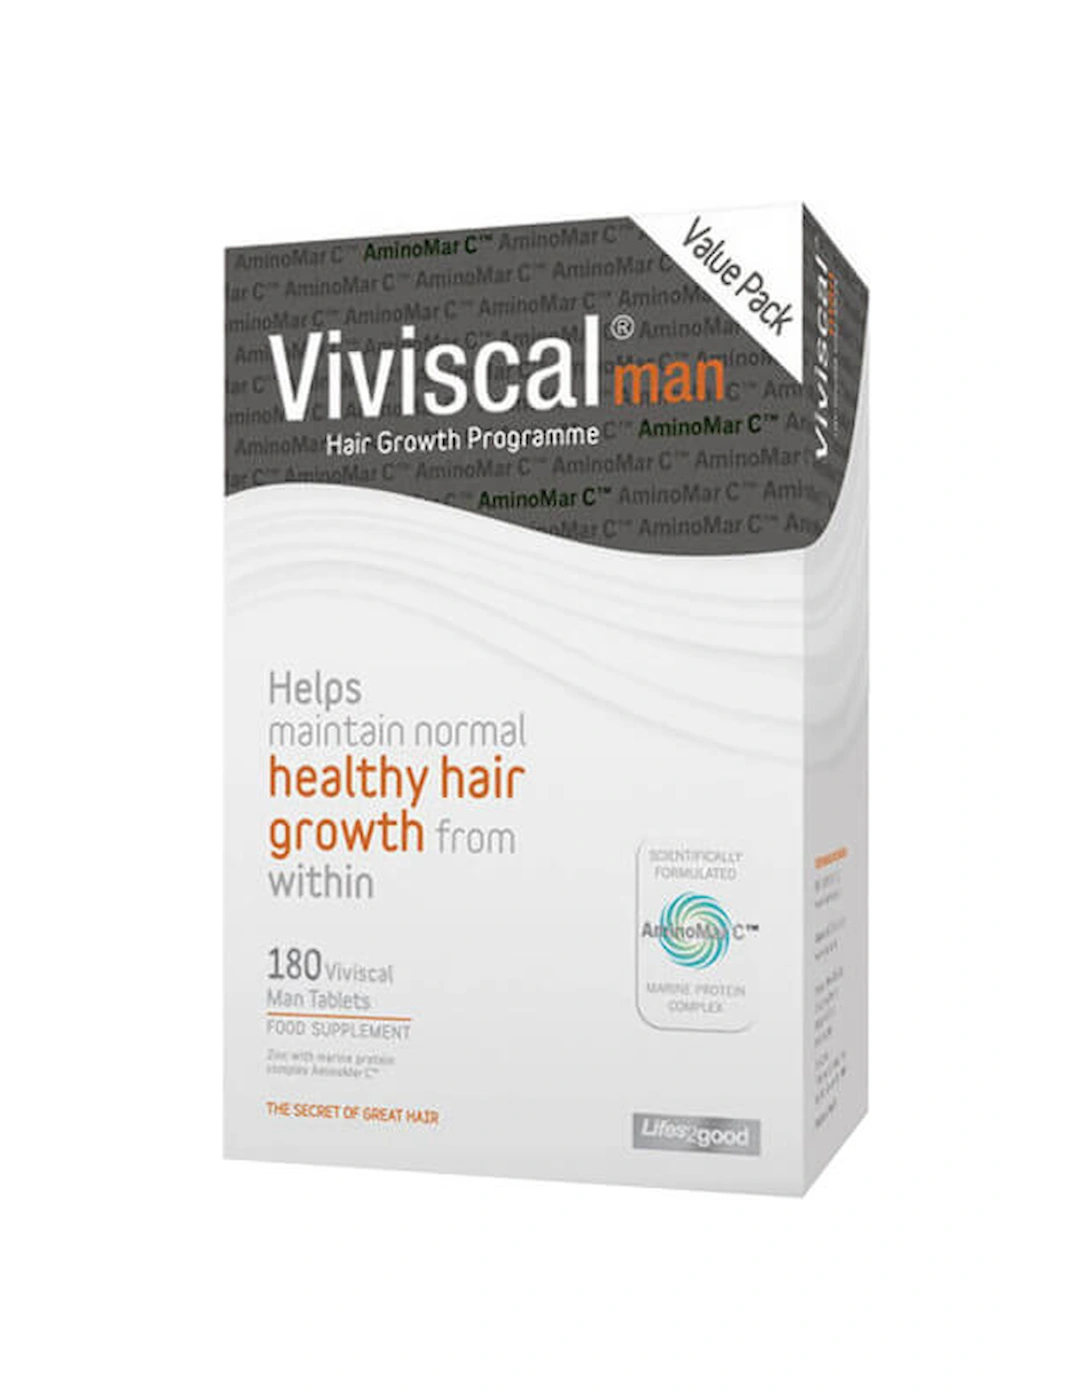 Zinc and Flax Seed Hair Supplement Tablets for Men - 180 Tablets (3 Month Supply) - Viviscal, 2 of 1